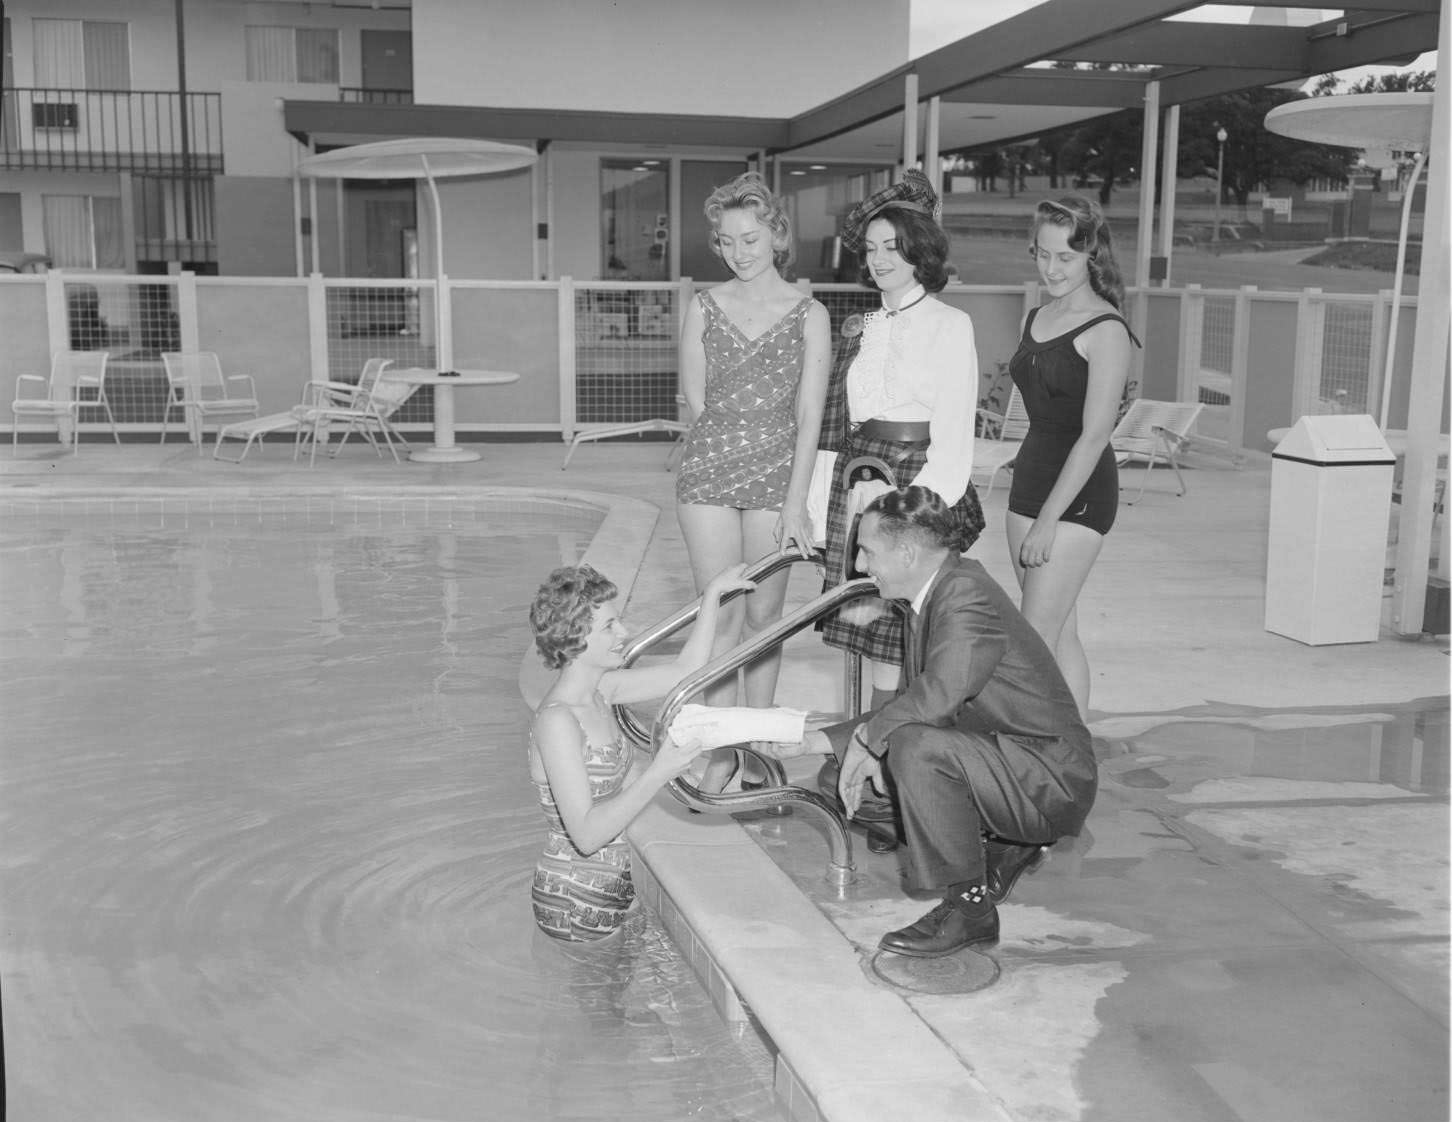 A man wearing a suit standing with four women at the pool at Imperial 400 Motel, 1962